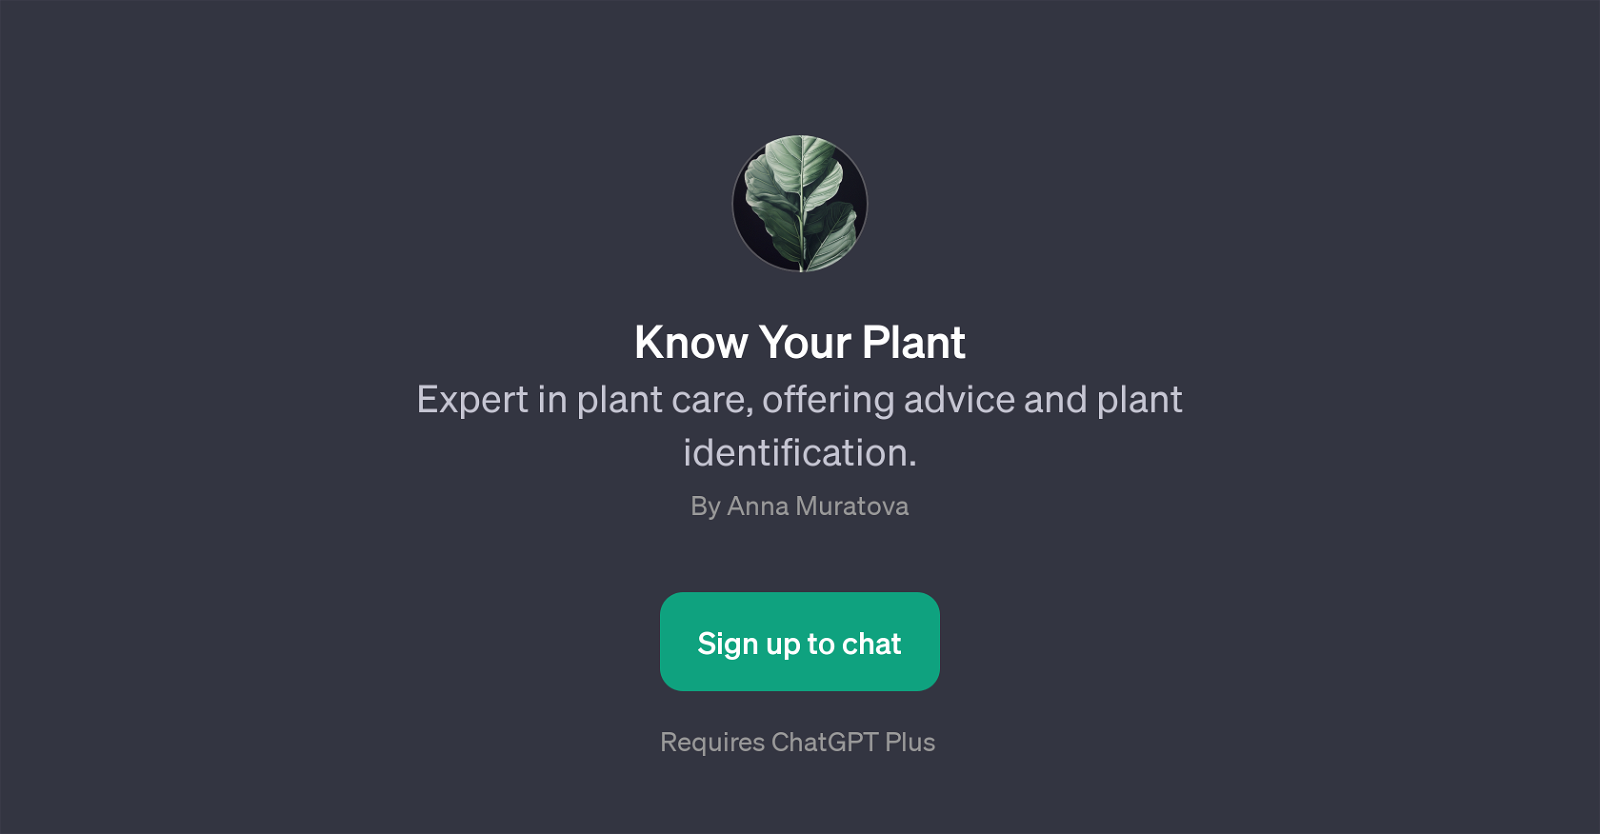 Know Your Plant website